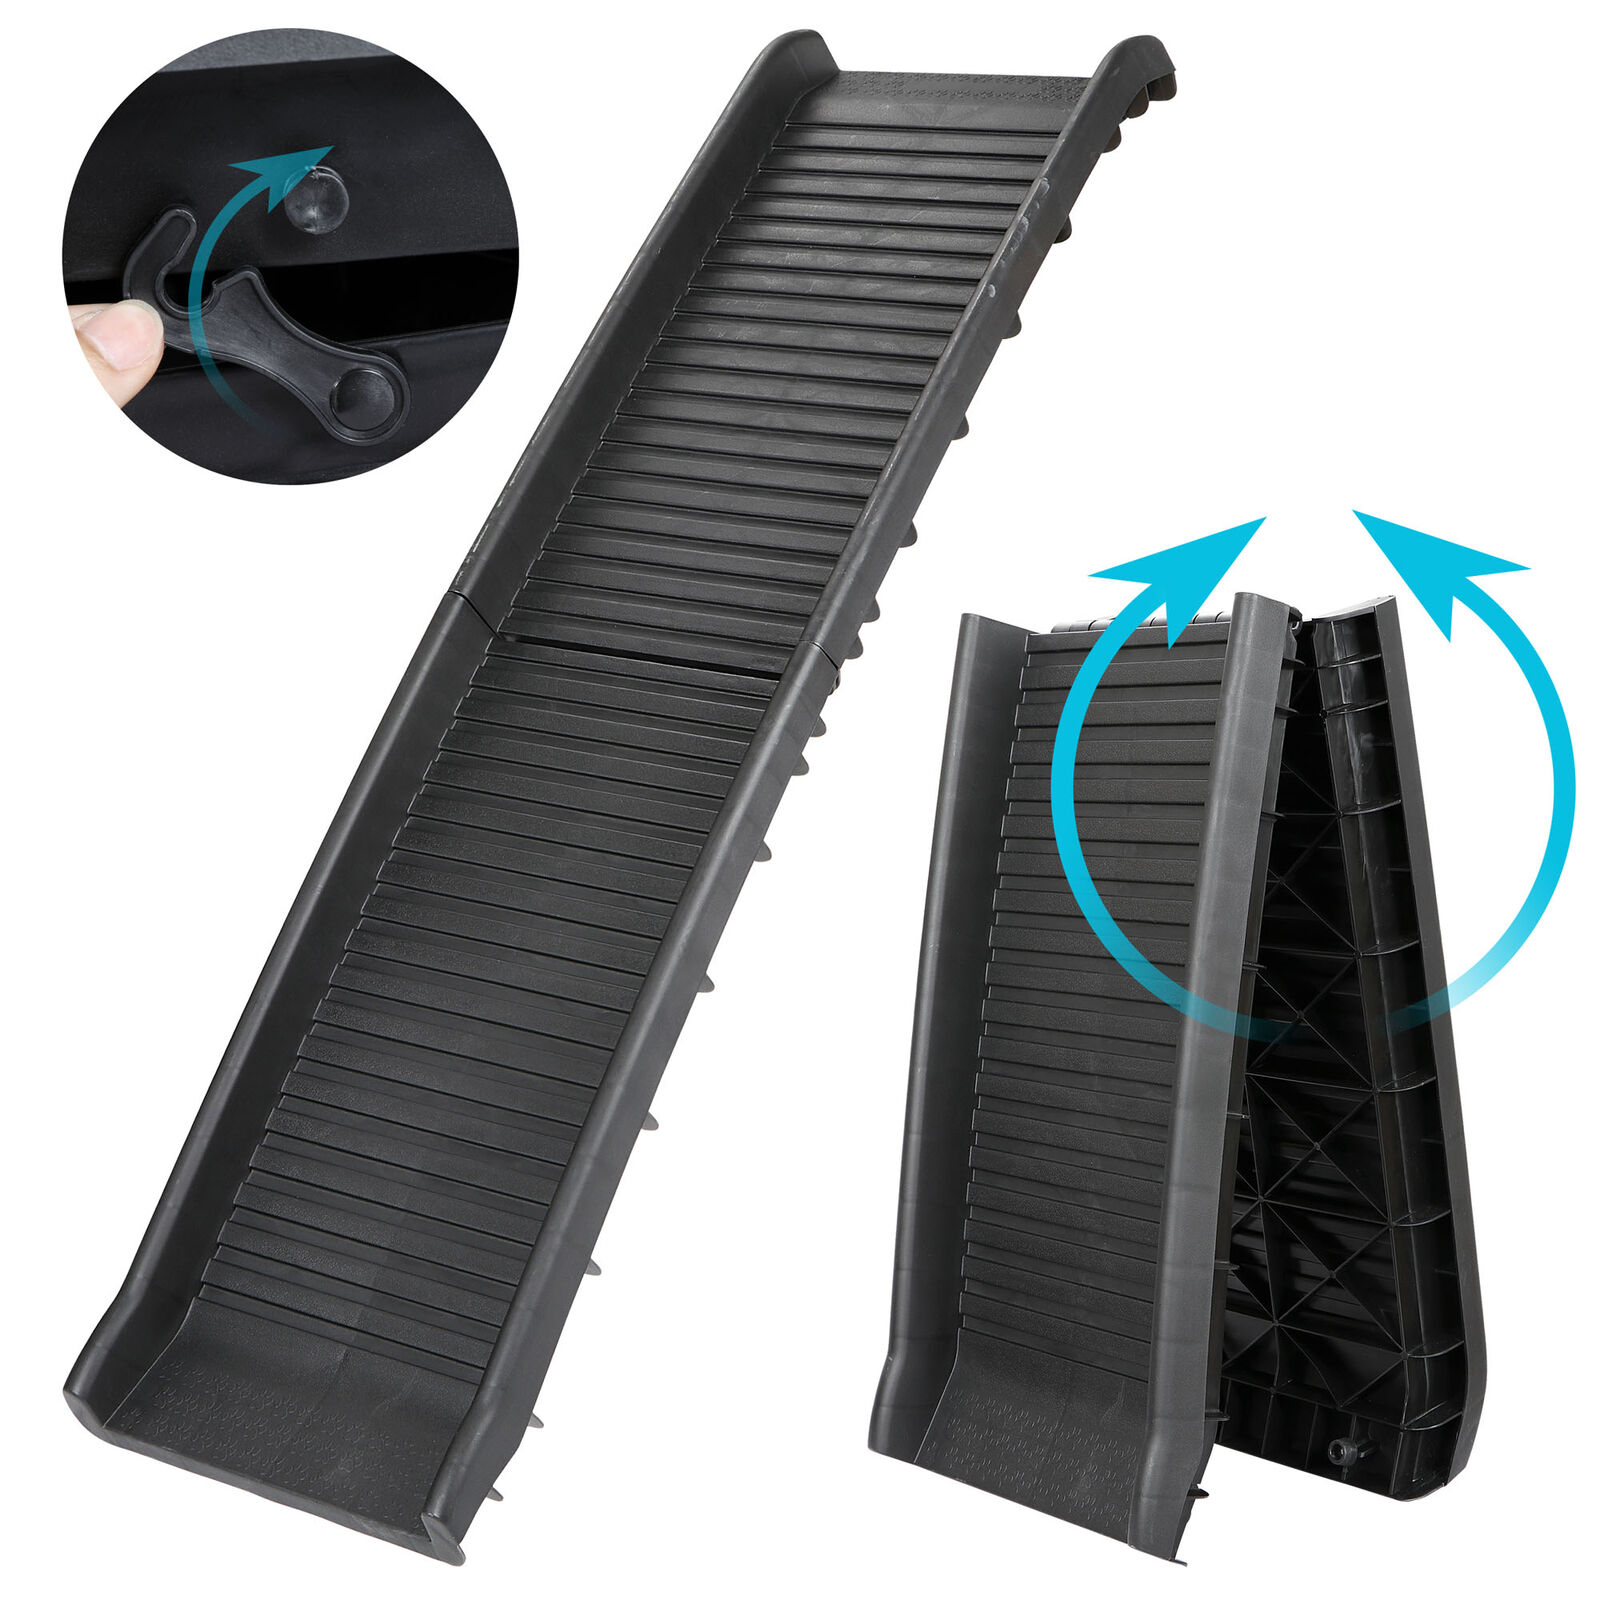 Heavy Duty Folding Dog Ramp Pet Ramps For Suv Cars Travel Portable Light Weight